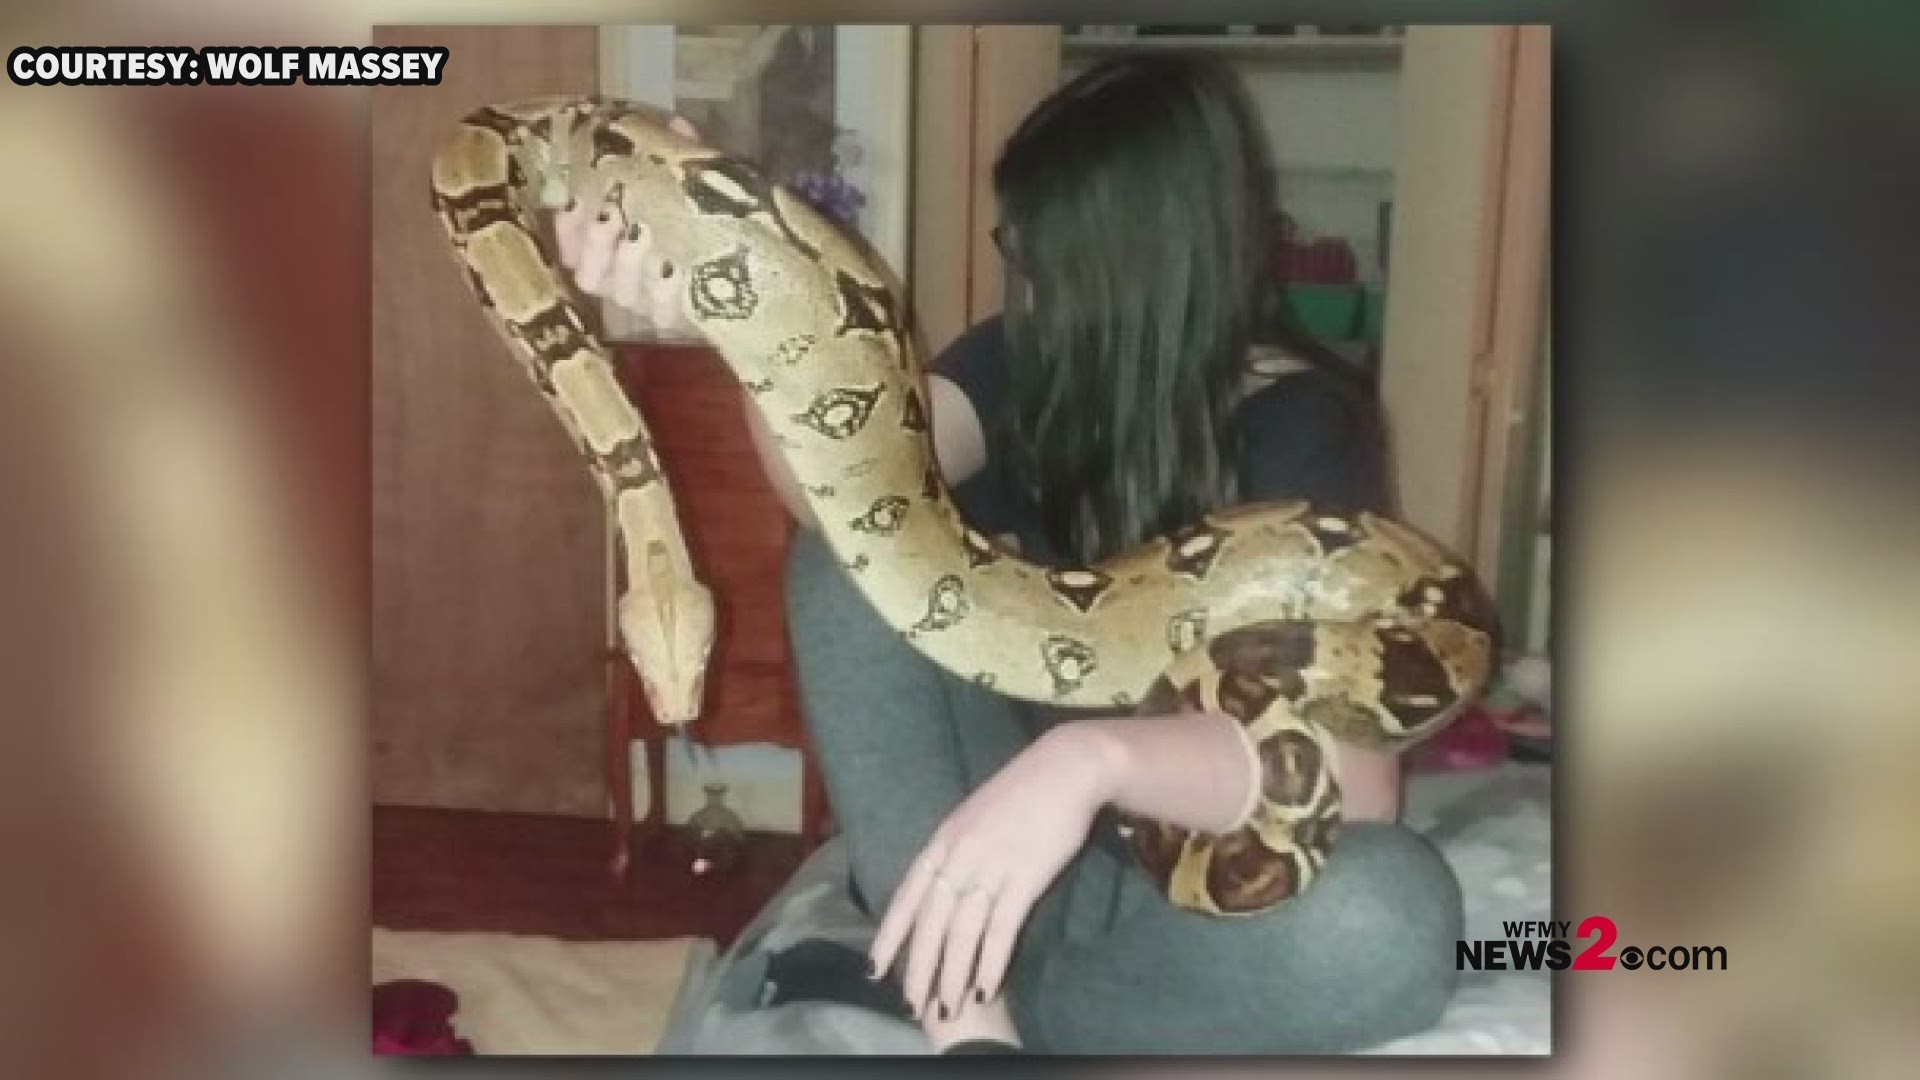 A 7-foot-long pet Boa Constrictor Imperator is missing from her enclosure at her home in Burlington.  Animal Services said you should take caution by keeping pets on a leash or under supervision when outside.